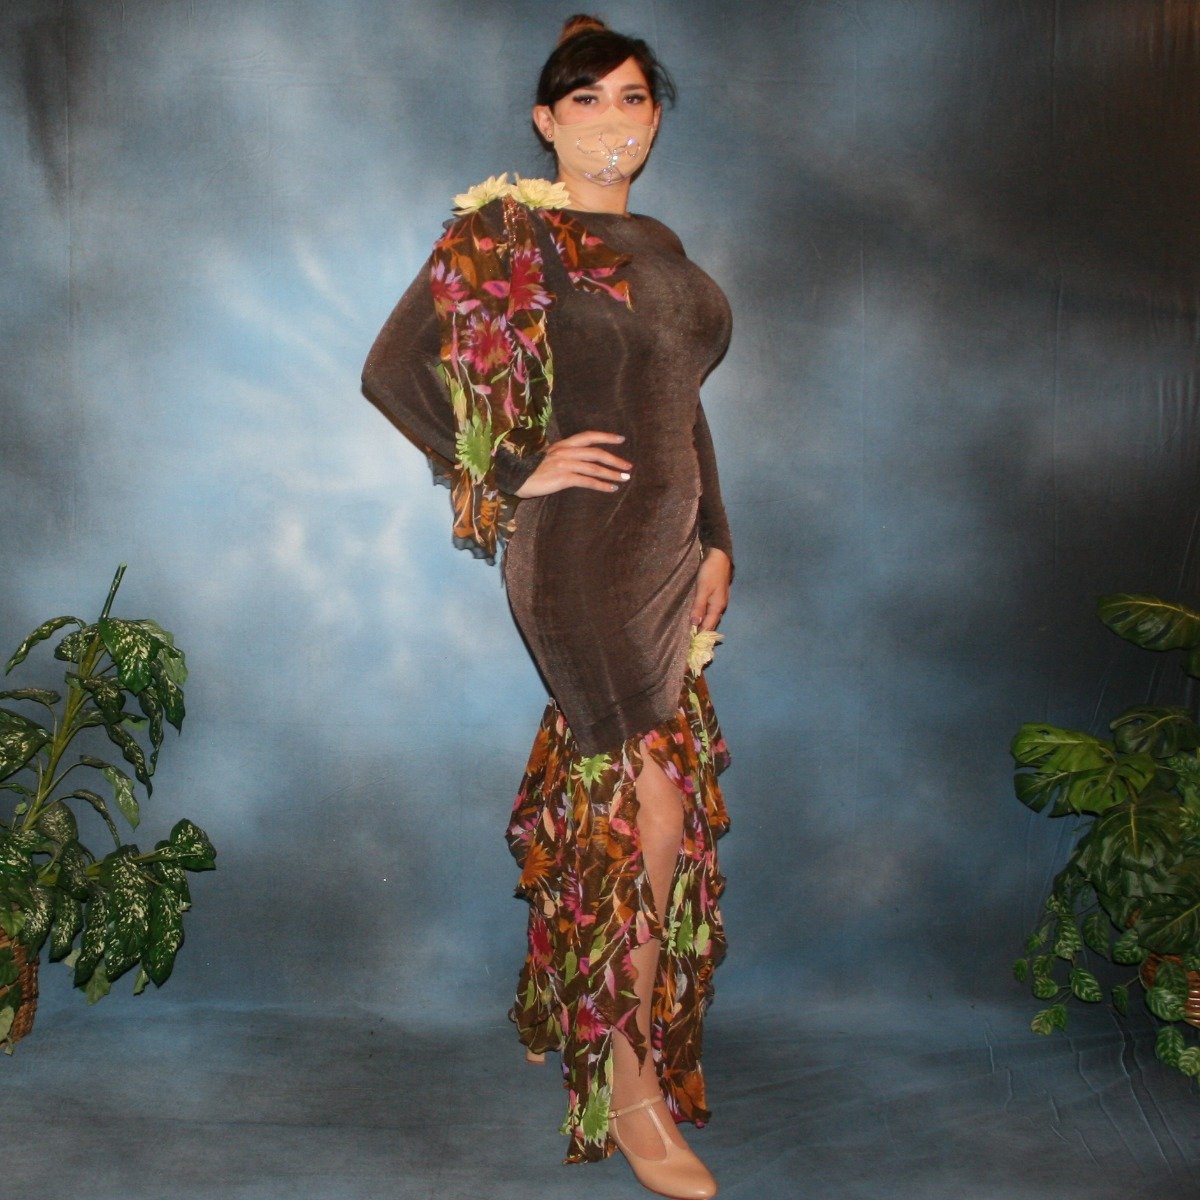 Crystal's Creations side view of brown ballroom dress created of luxurious chocolate brown slinky along with fall flowers print chiffon